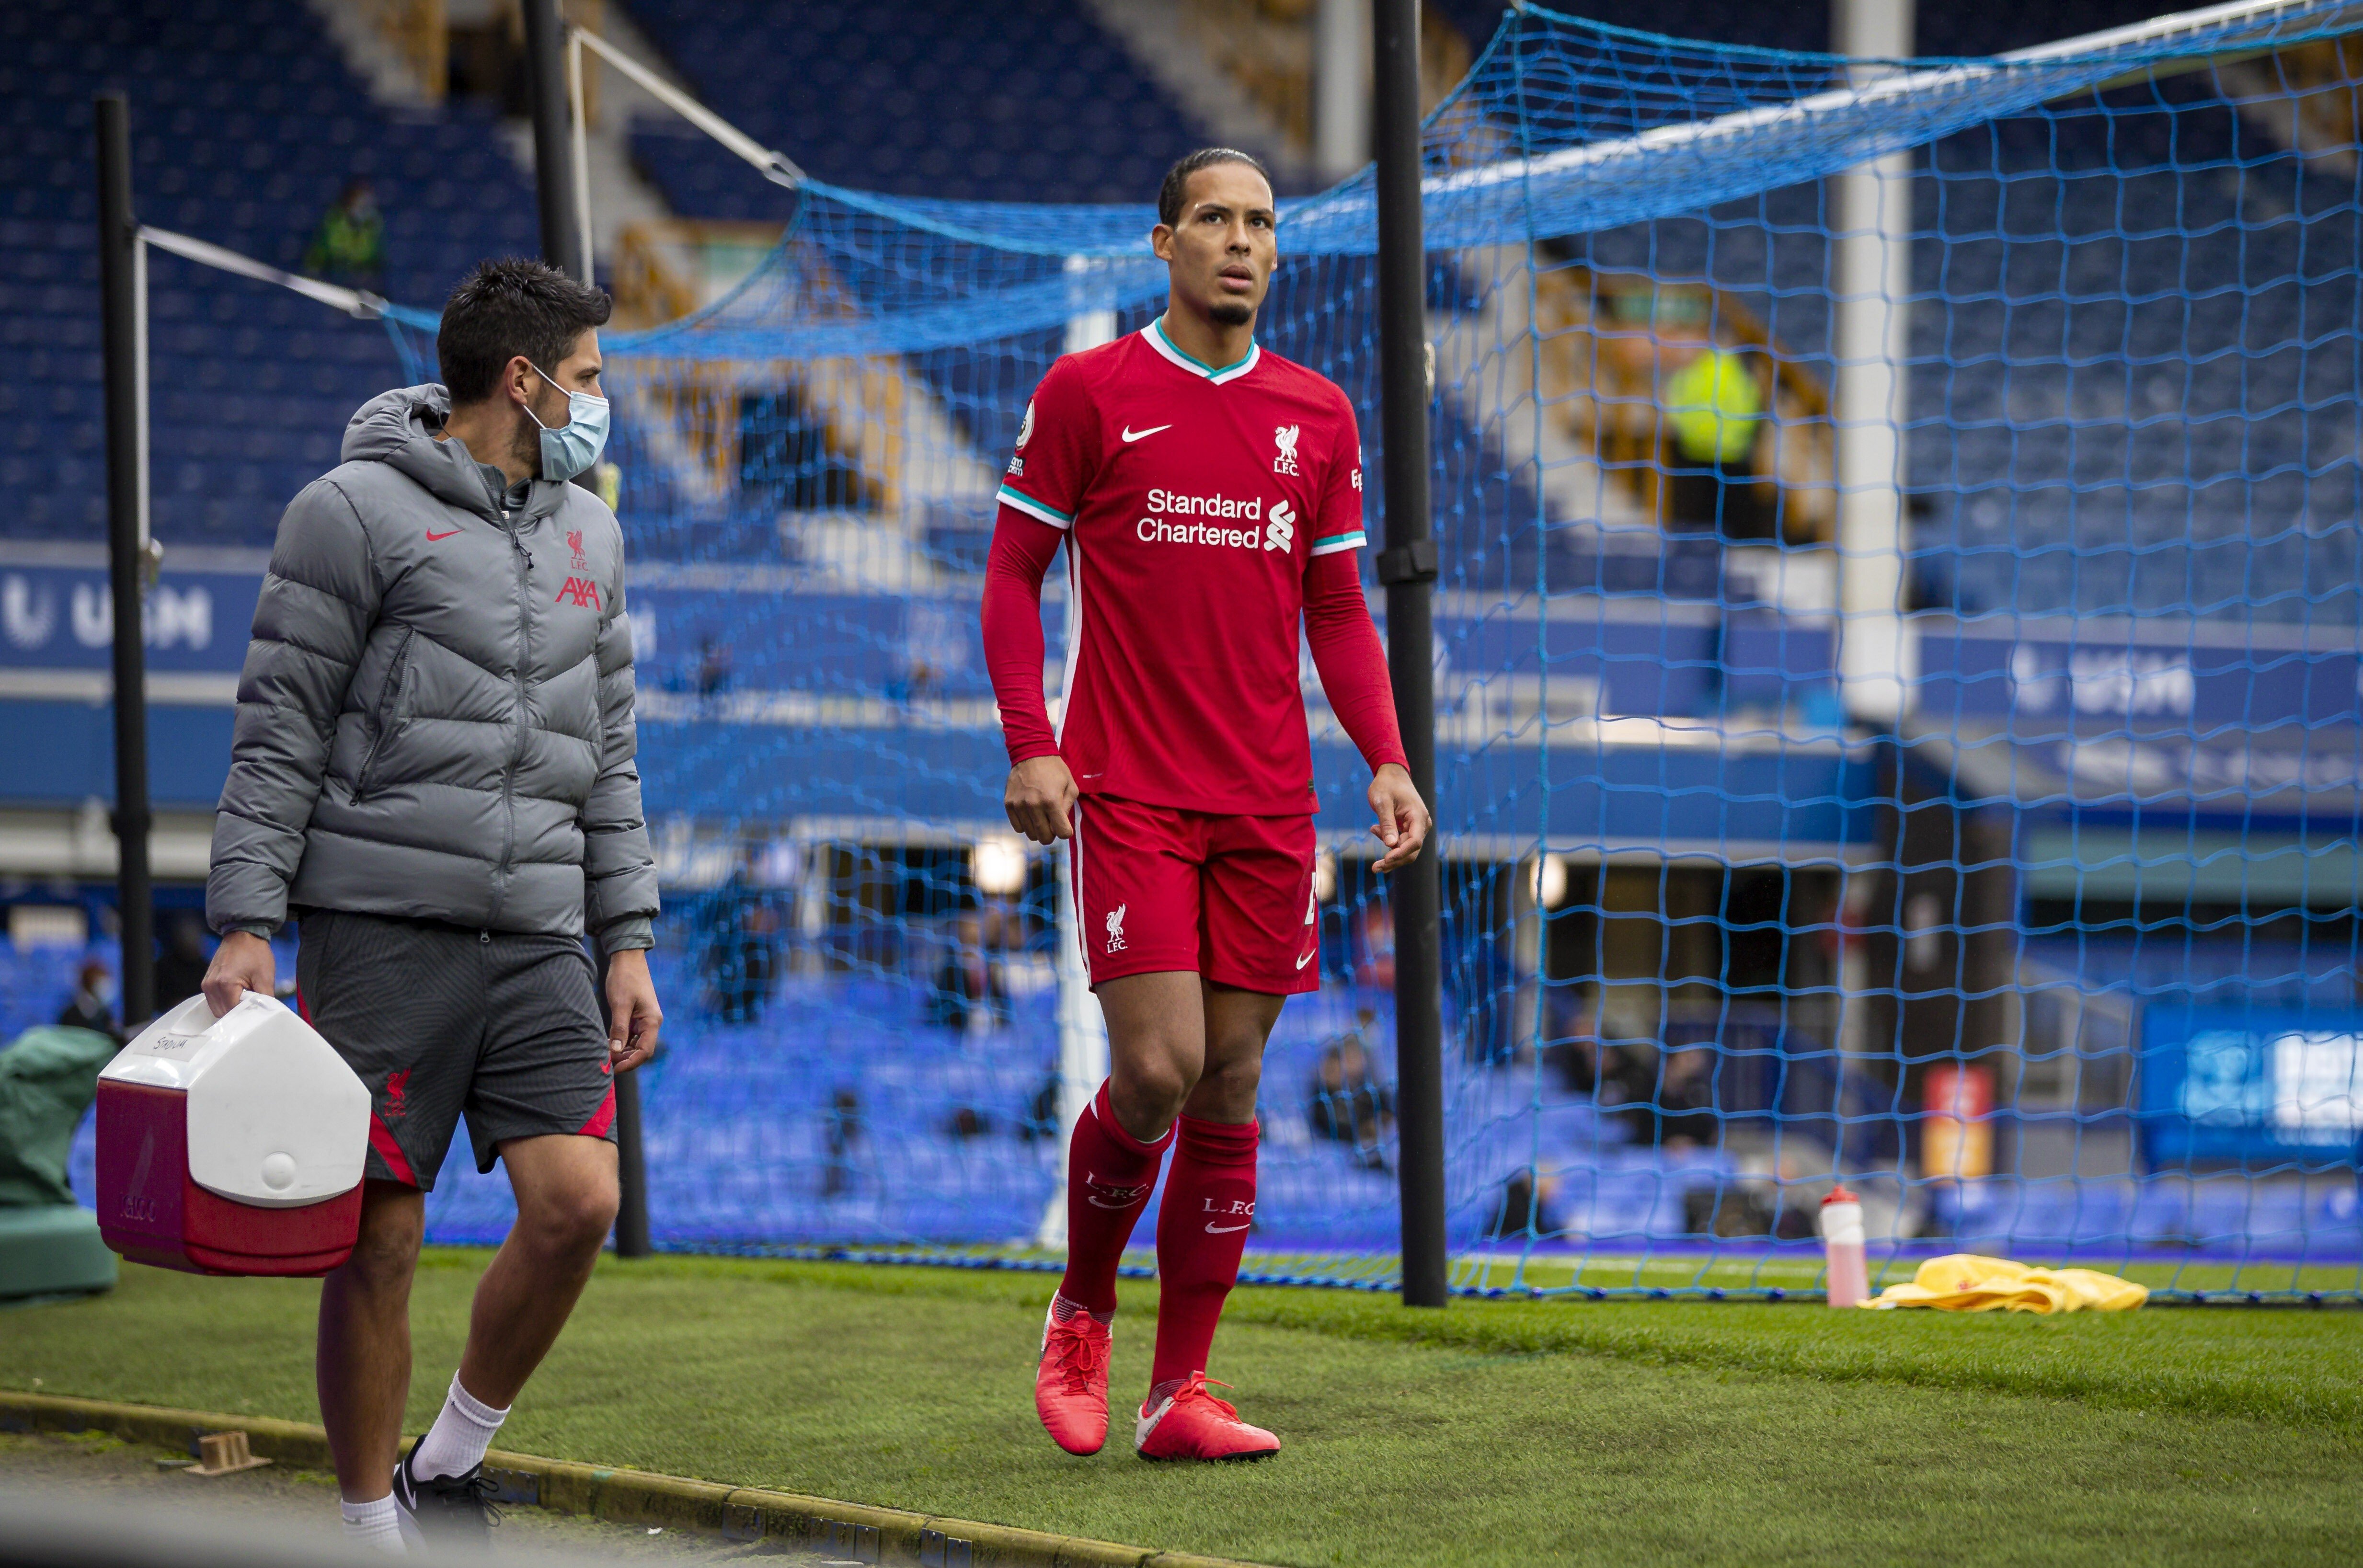 Liverpool now simply need to get on with dealing with the absence of Virgil van Dijk, however aggrieved they feel over the vice-captain’s injury. Photo: Xinhua